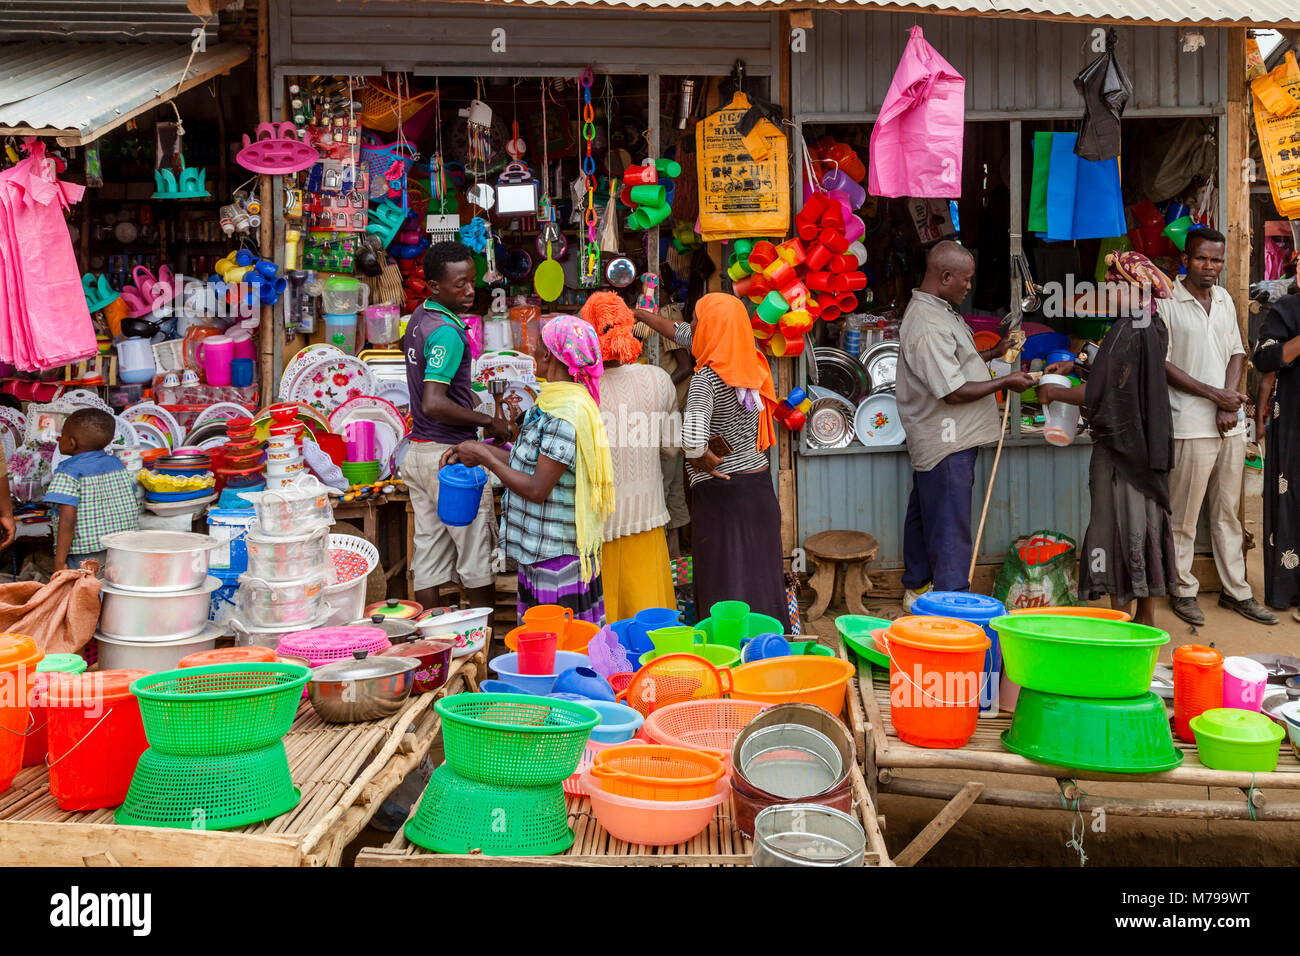 People Buying and Selling Plastic Household Items At The Weekly Market In Jinka, Omo Valley, Ethiopia Stock Photo